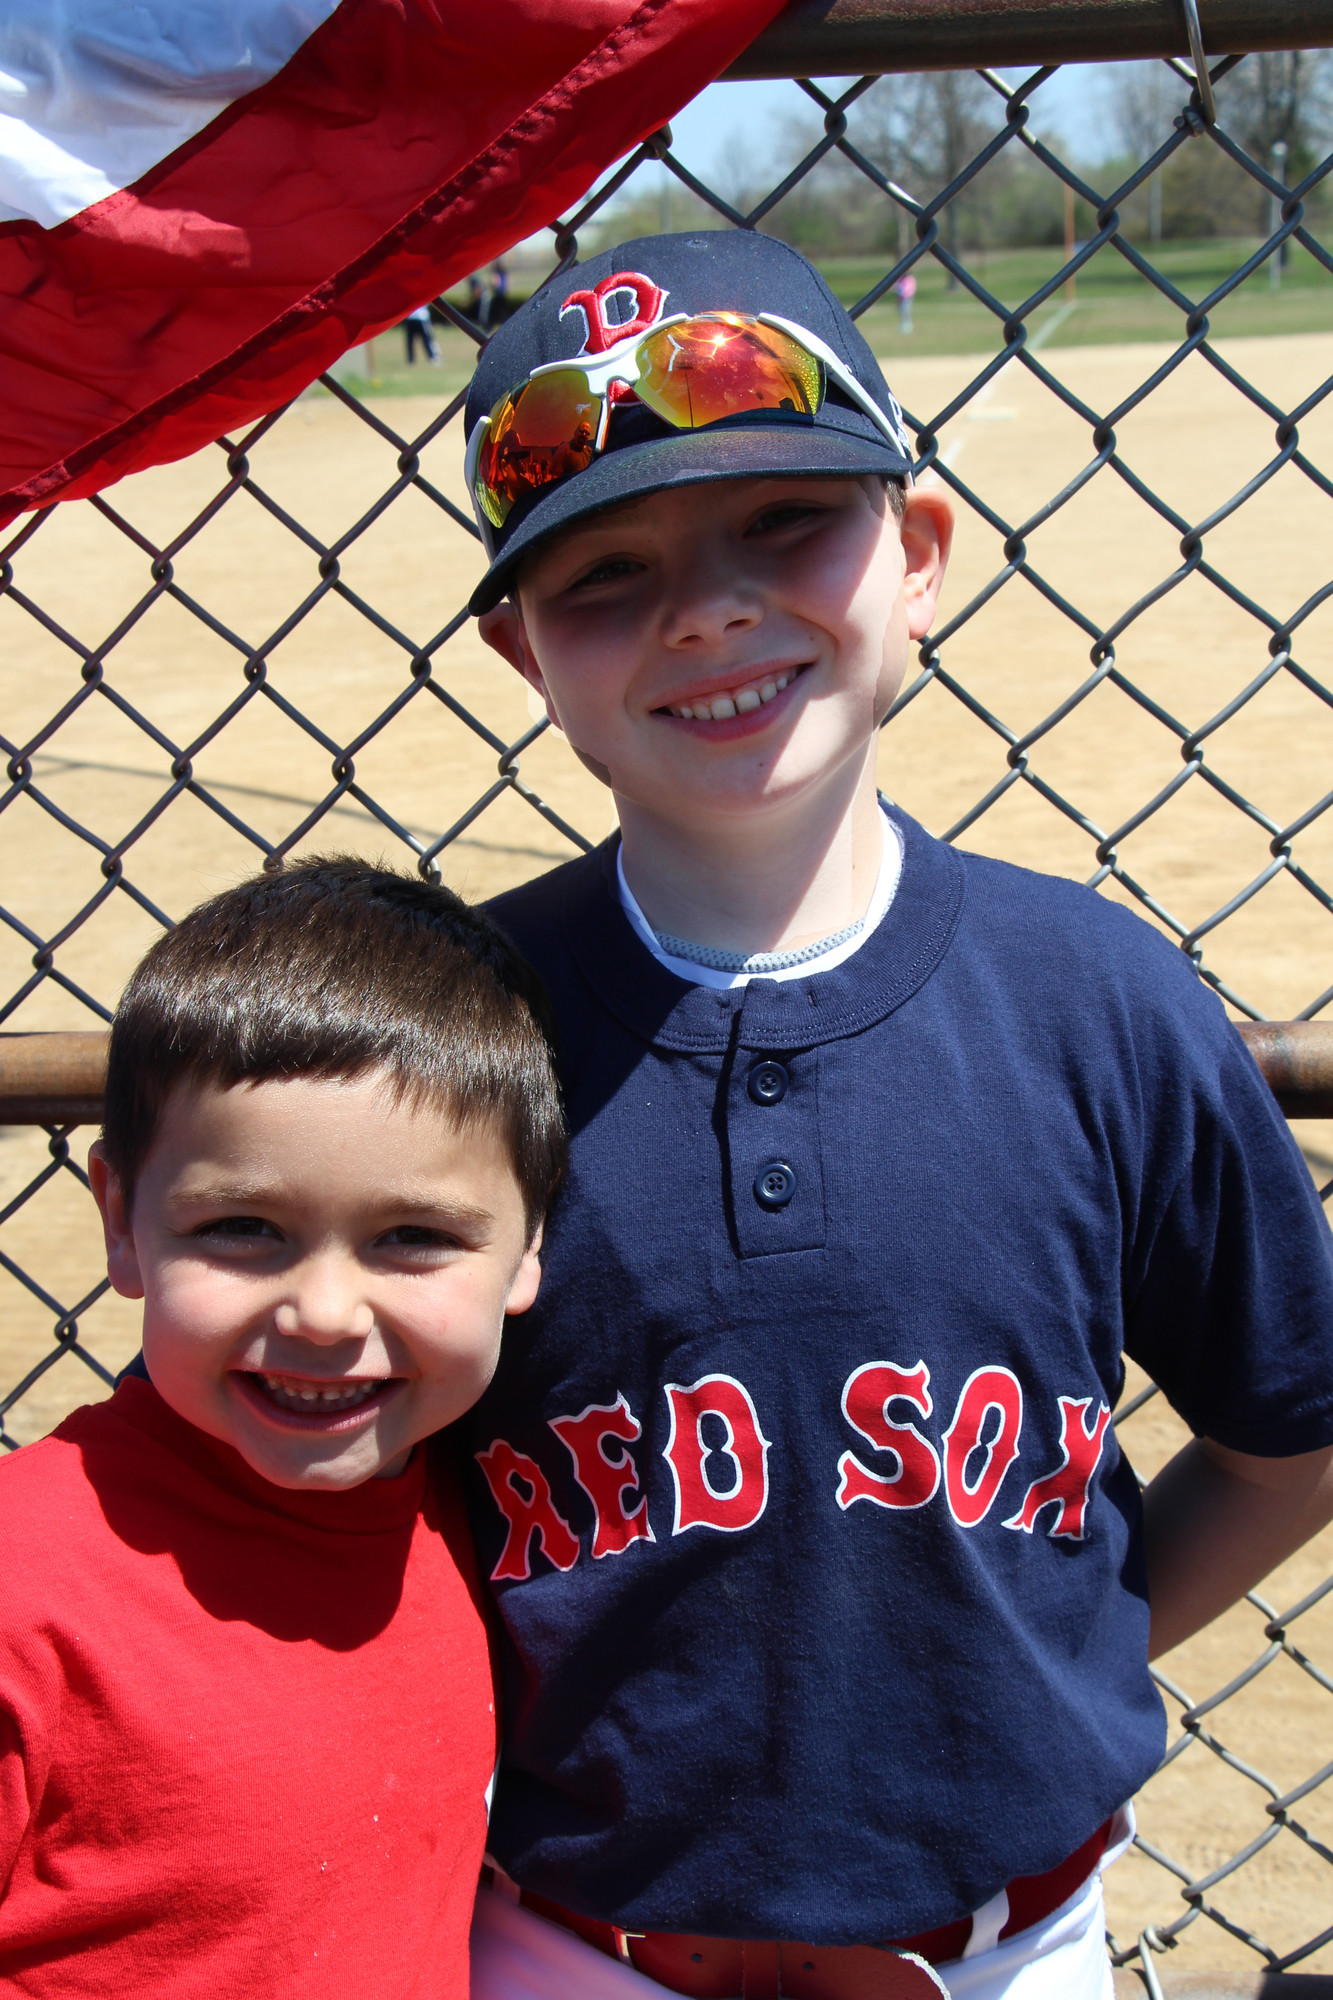 The Carney Brothers Ryan, 7, of the Reds  and John Jr., 10, who plays for the Red Sox were all smiles.